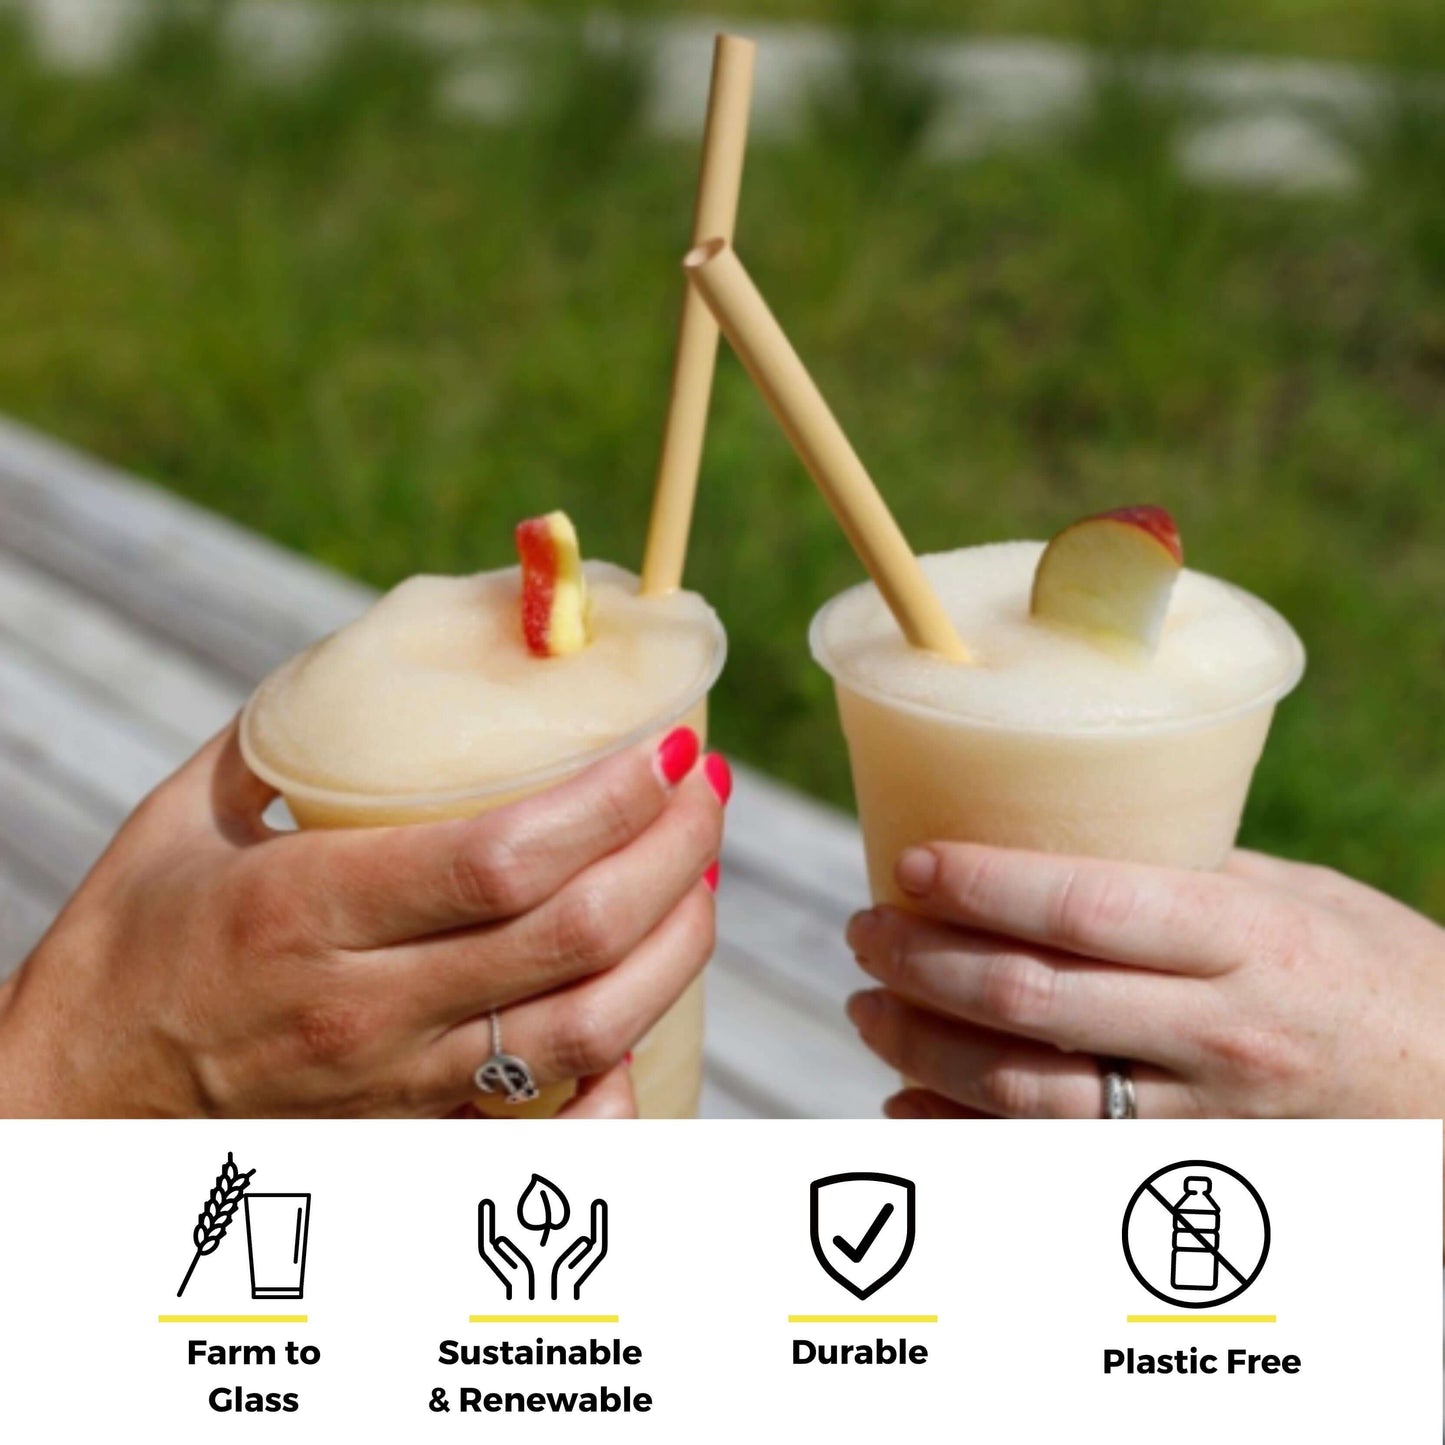 Cocktail Reusable Reed Straws | 10ct. by Holy City Straw Company